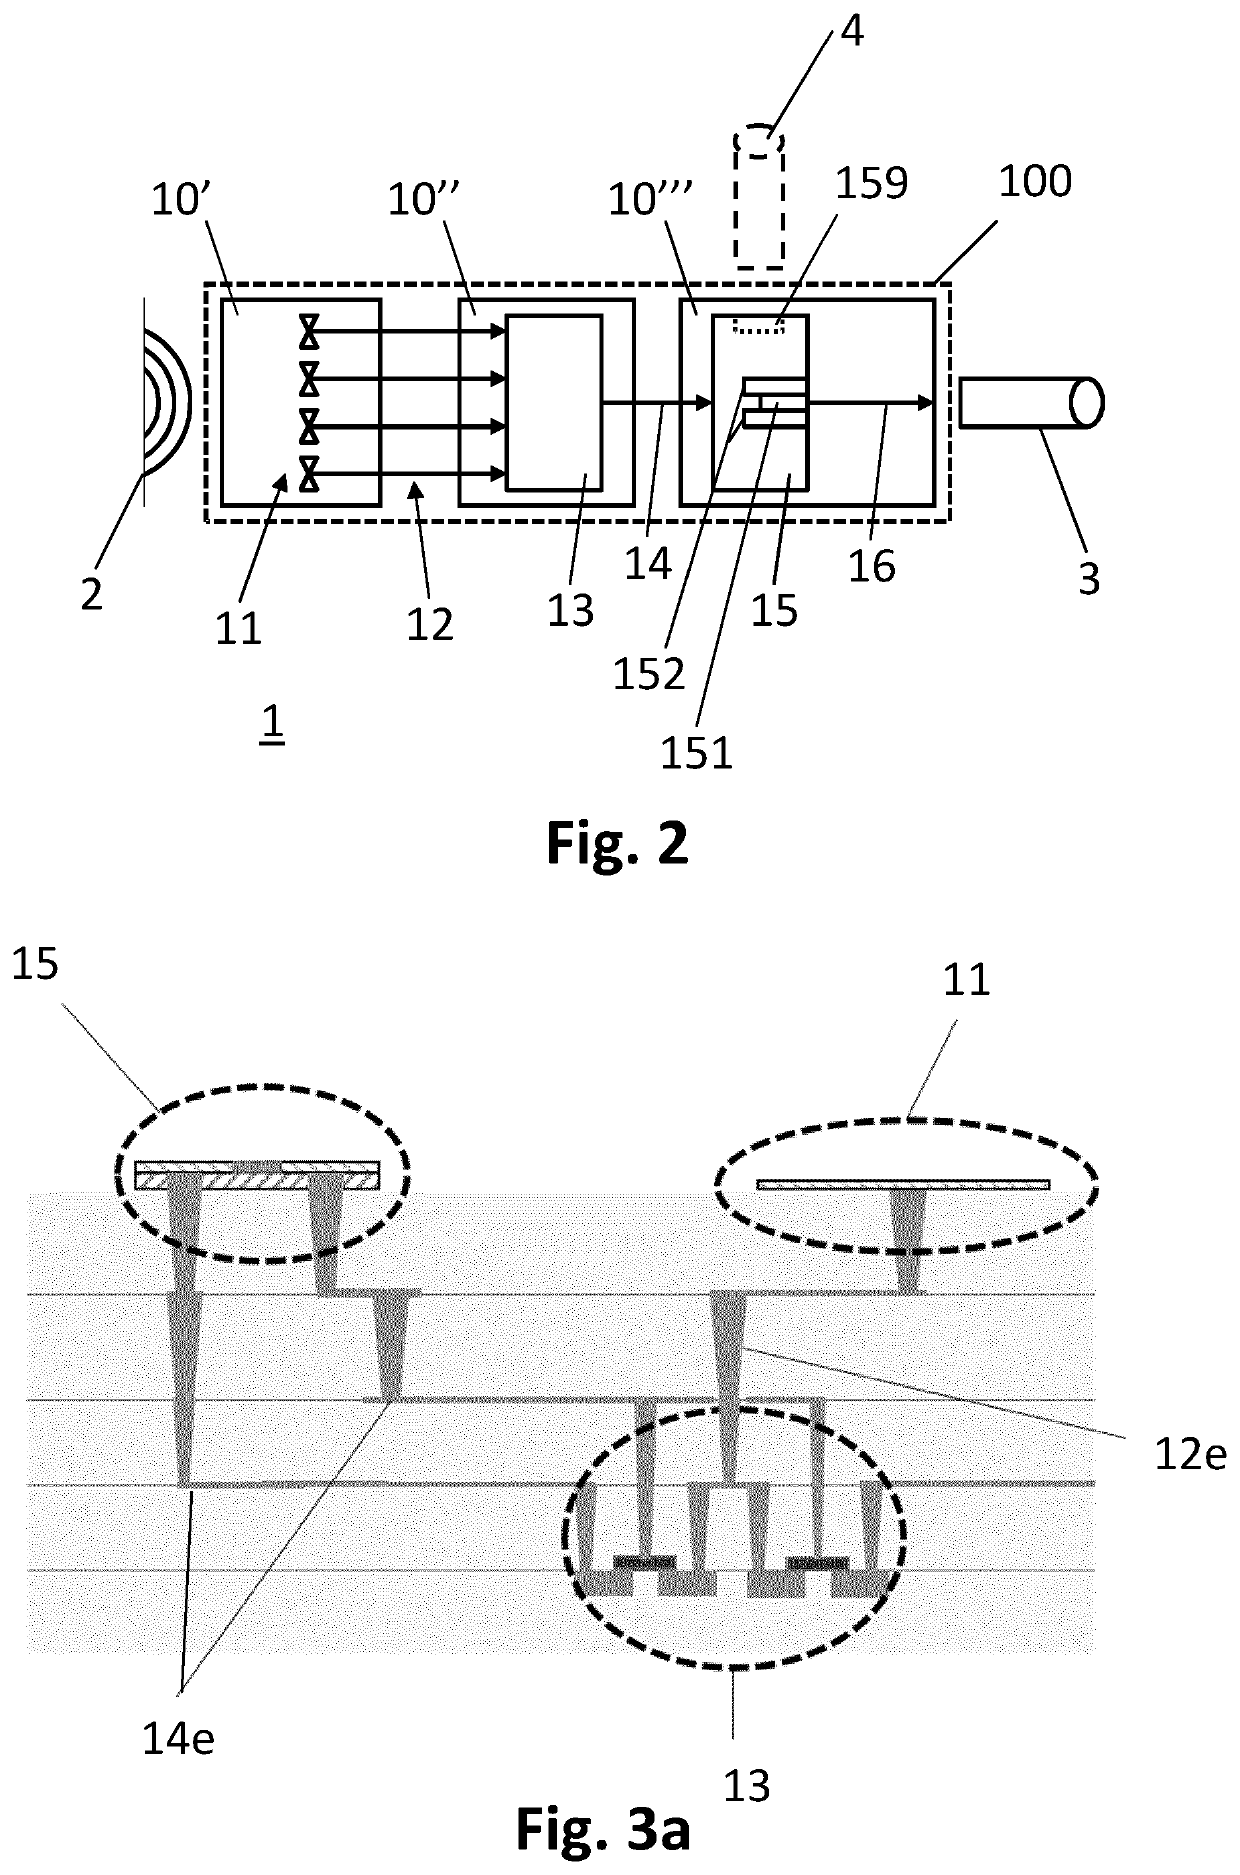 Electronic device for converting a wireless signal into at least one modulated optical signal